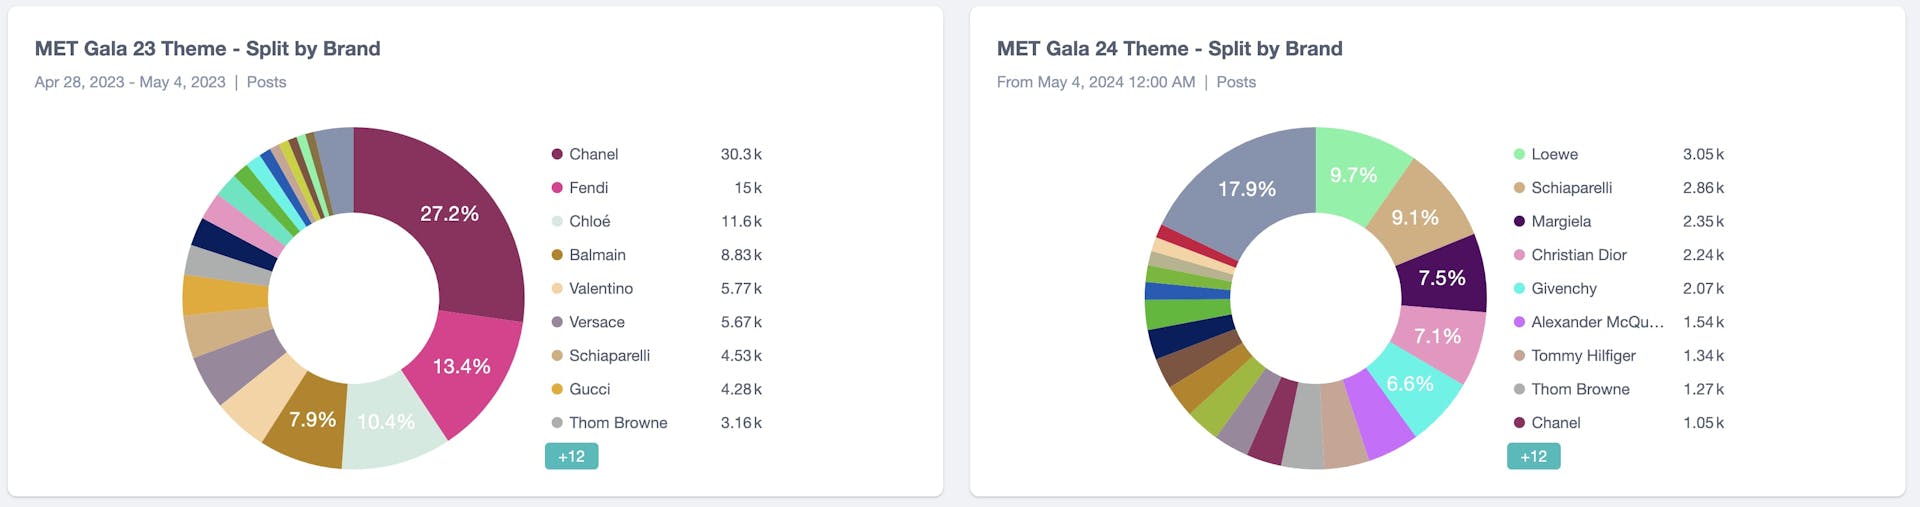 Charts showing the split by brand of mentions of the Met Gala theme for 2023 and 2024